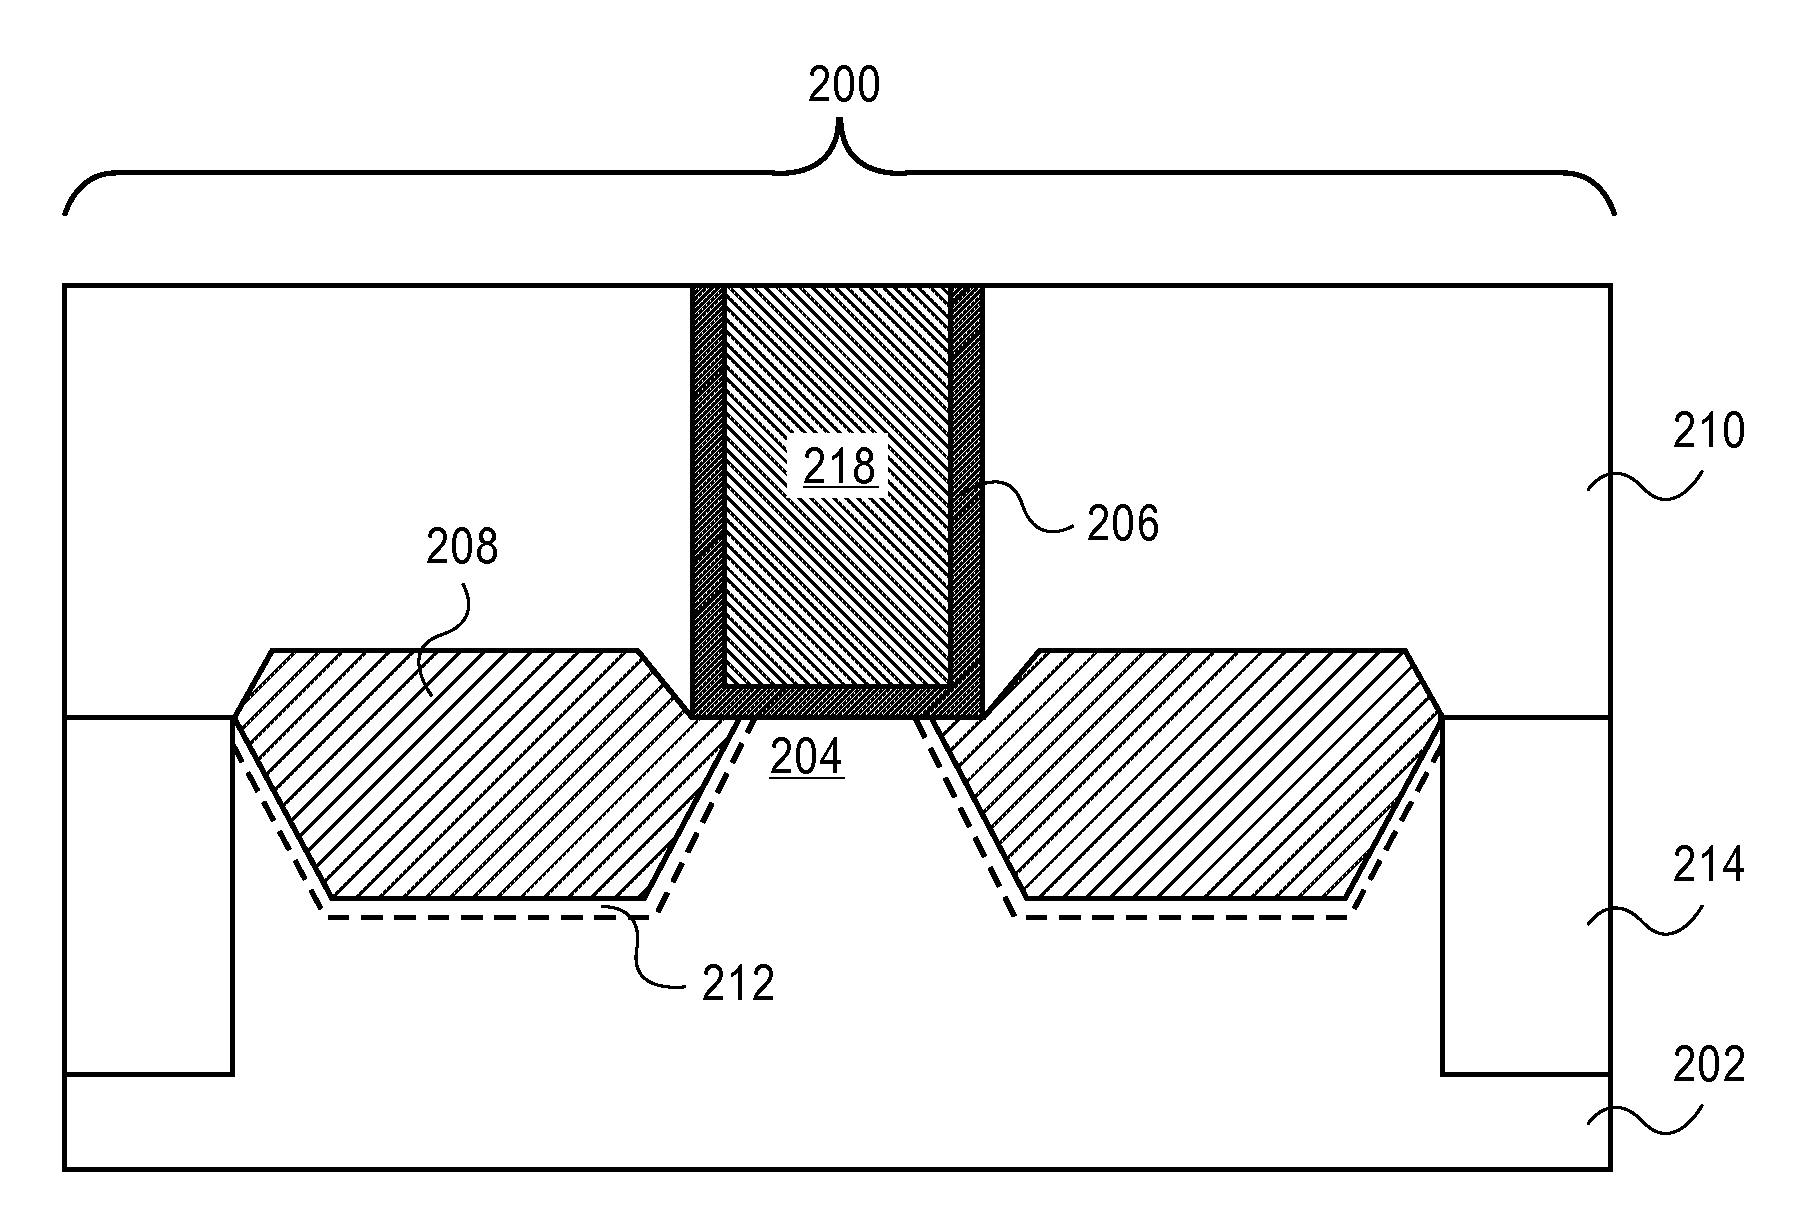 Semiconductor device having tipless epitaxial source/drain regions